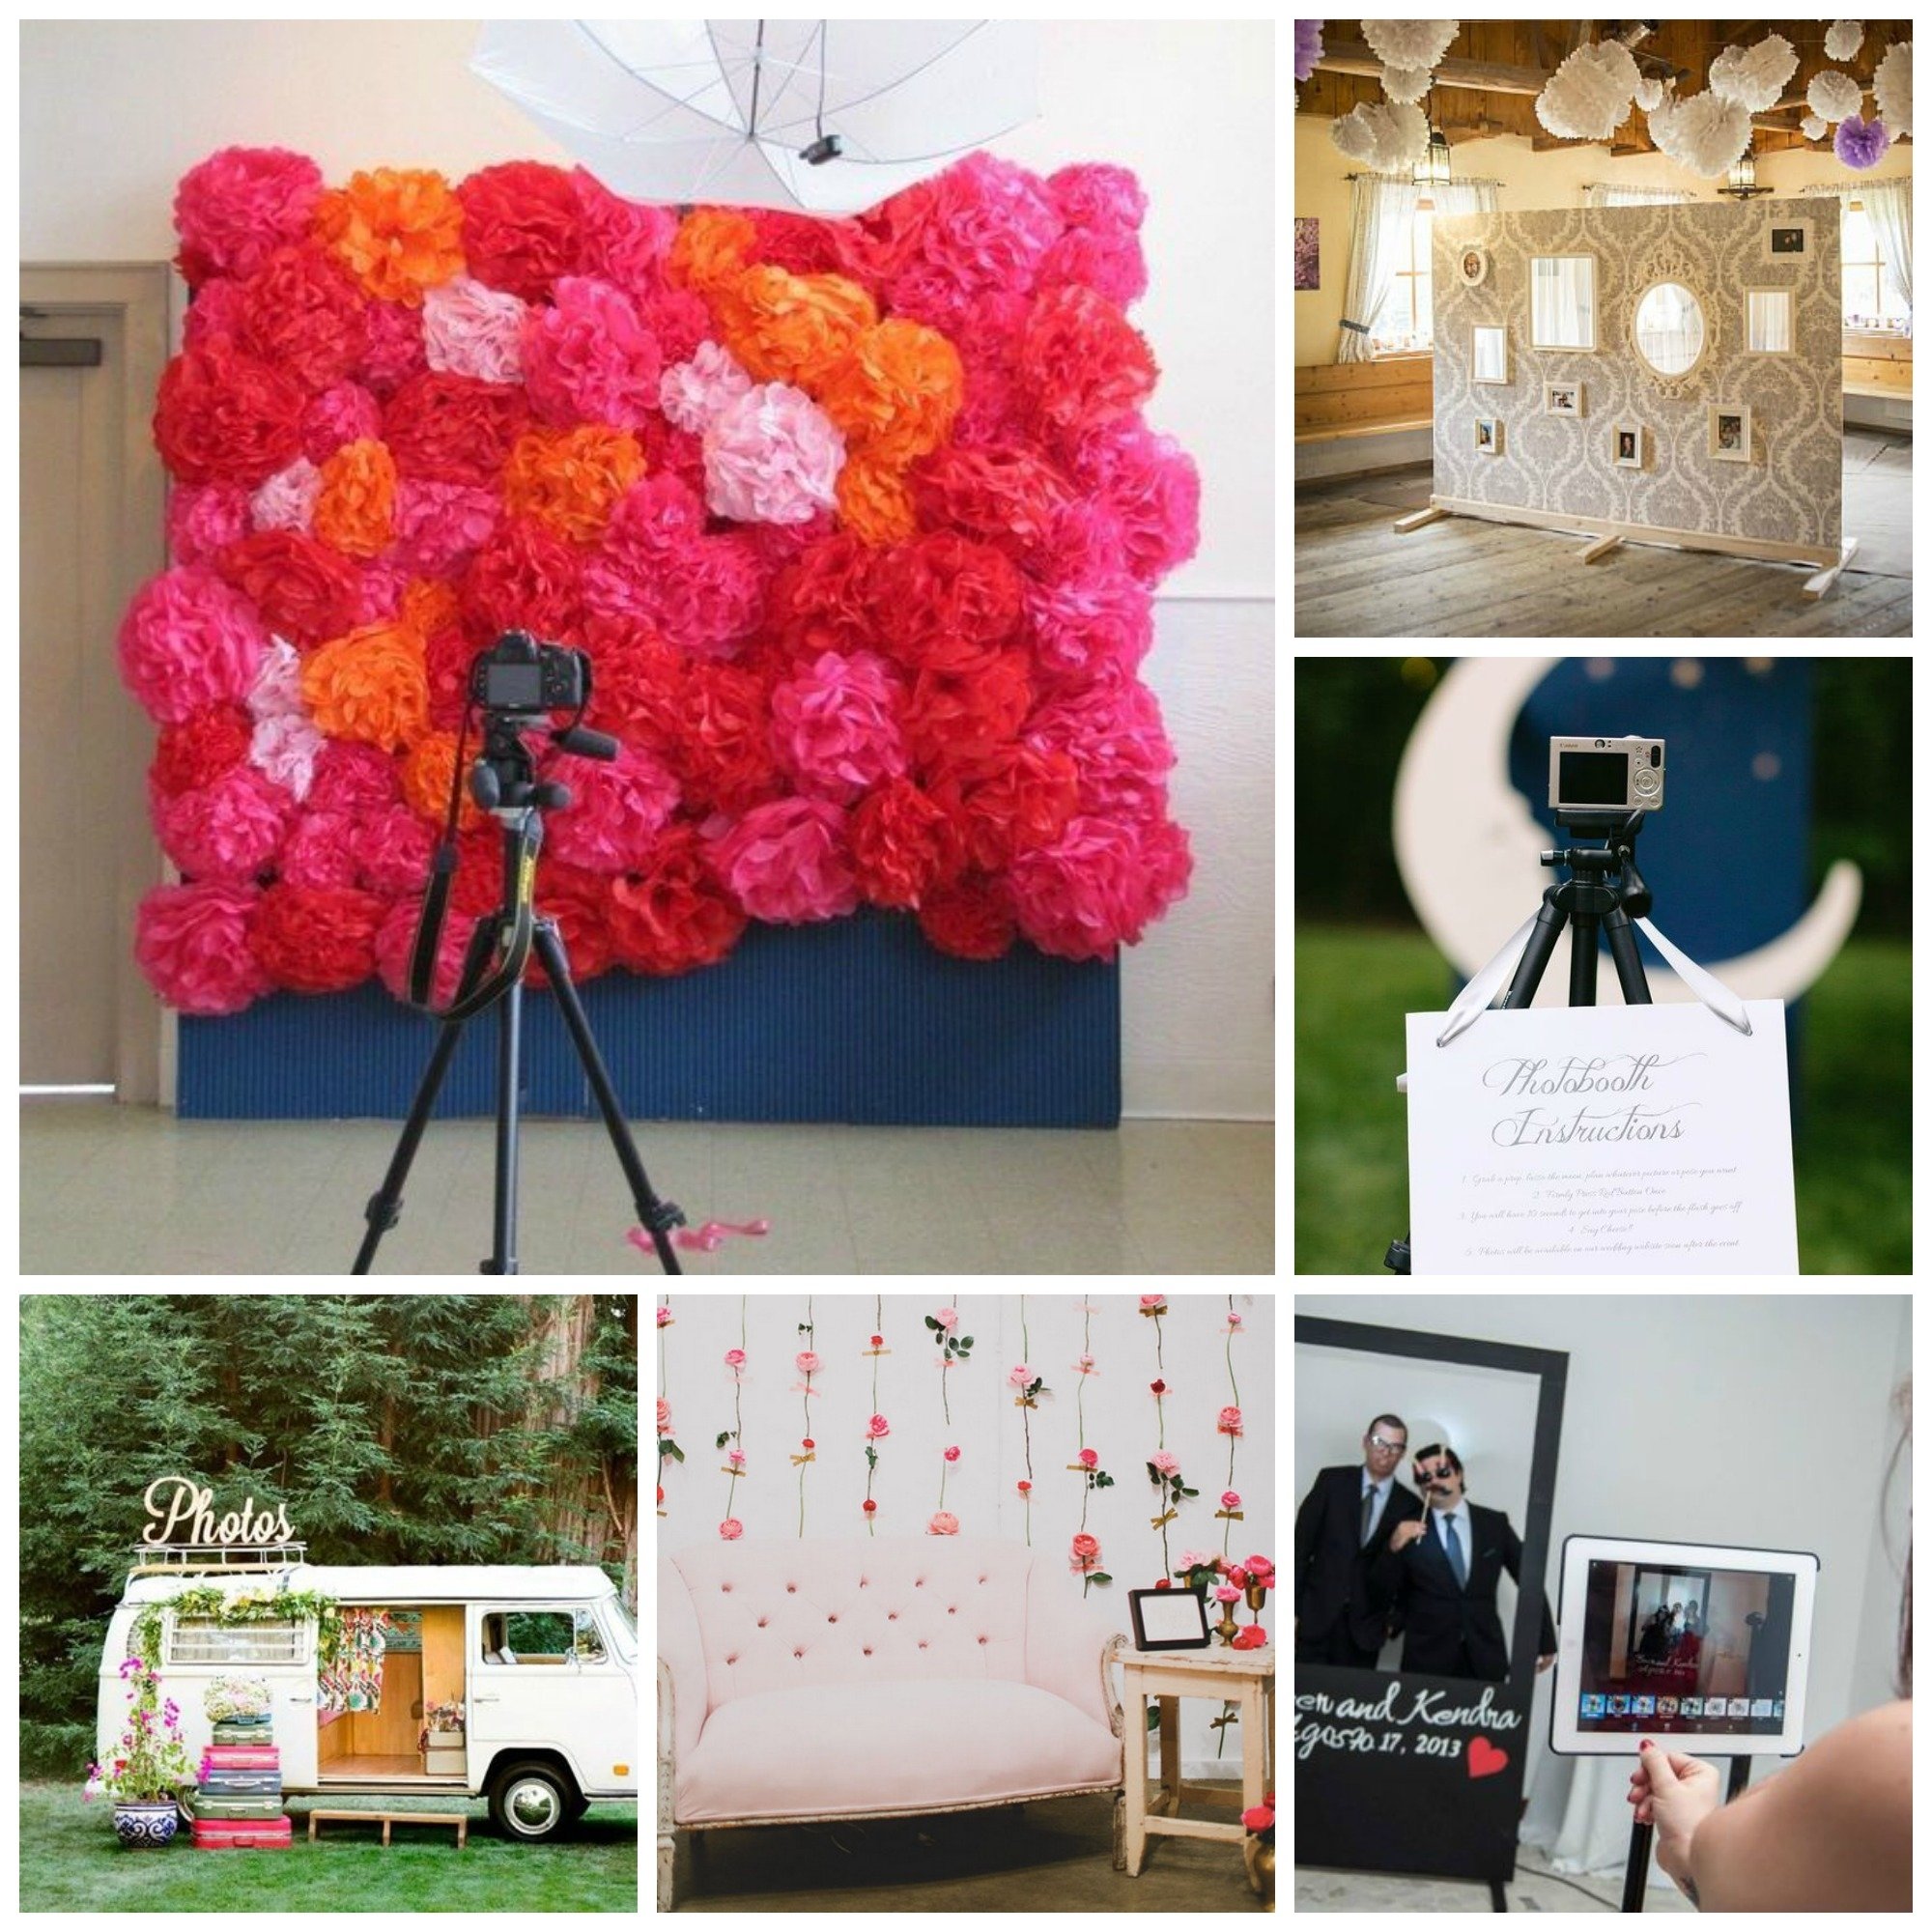 10 Most Popular Photo Booth Ideas For Weddings wedding photo booth diy unique wedding photobooth fun perfect 2022